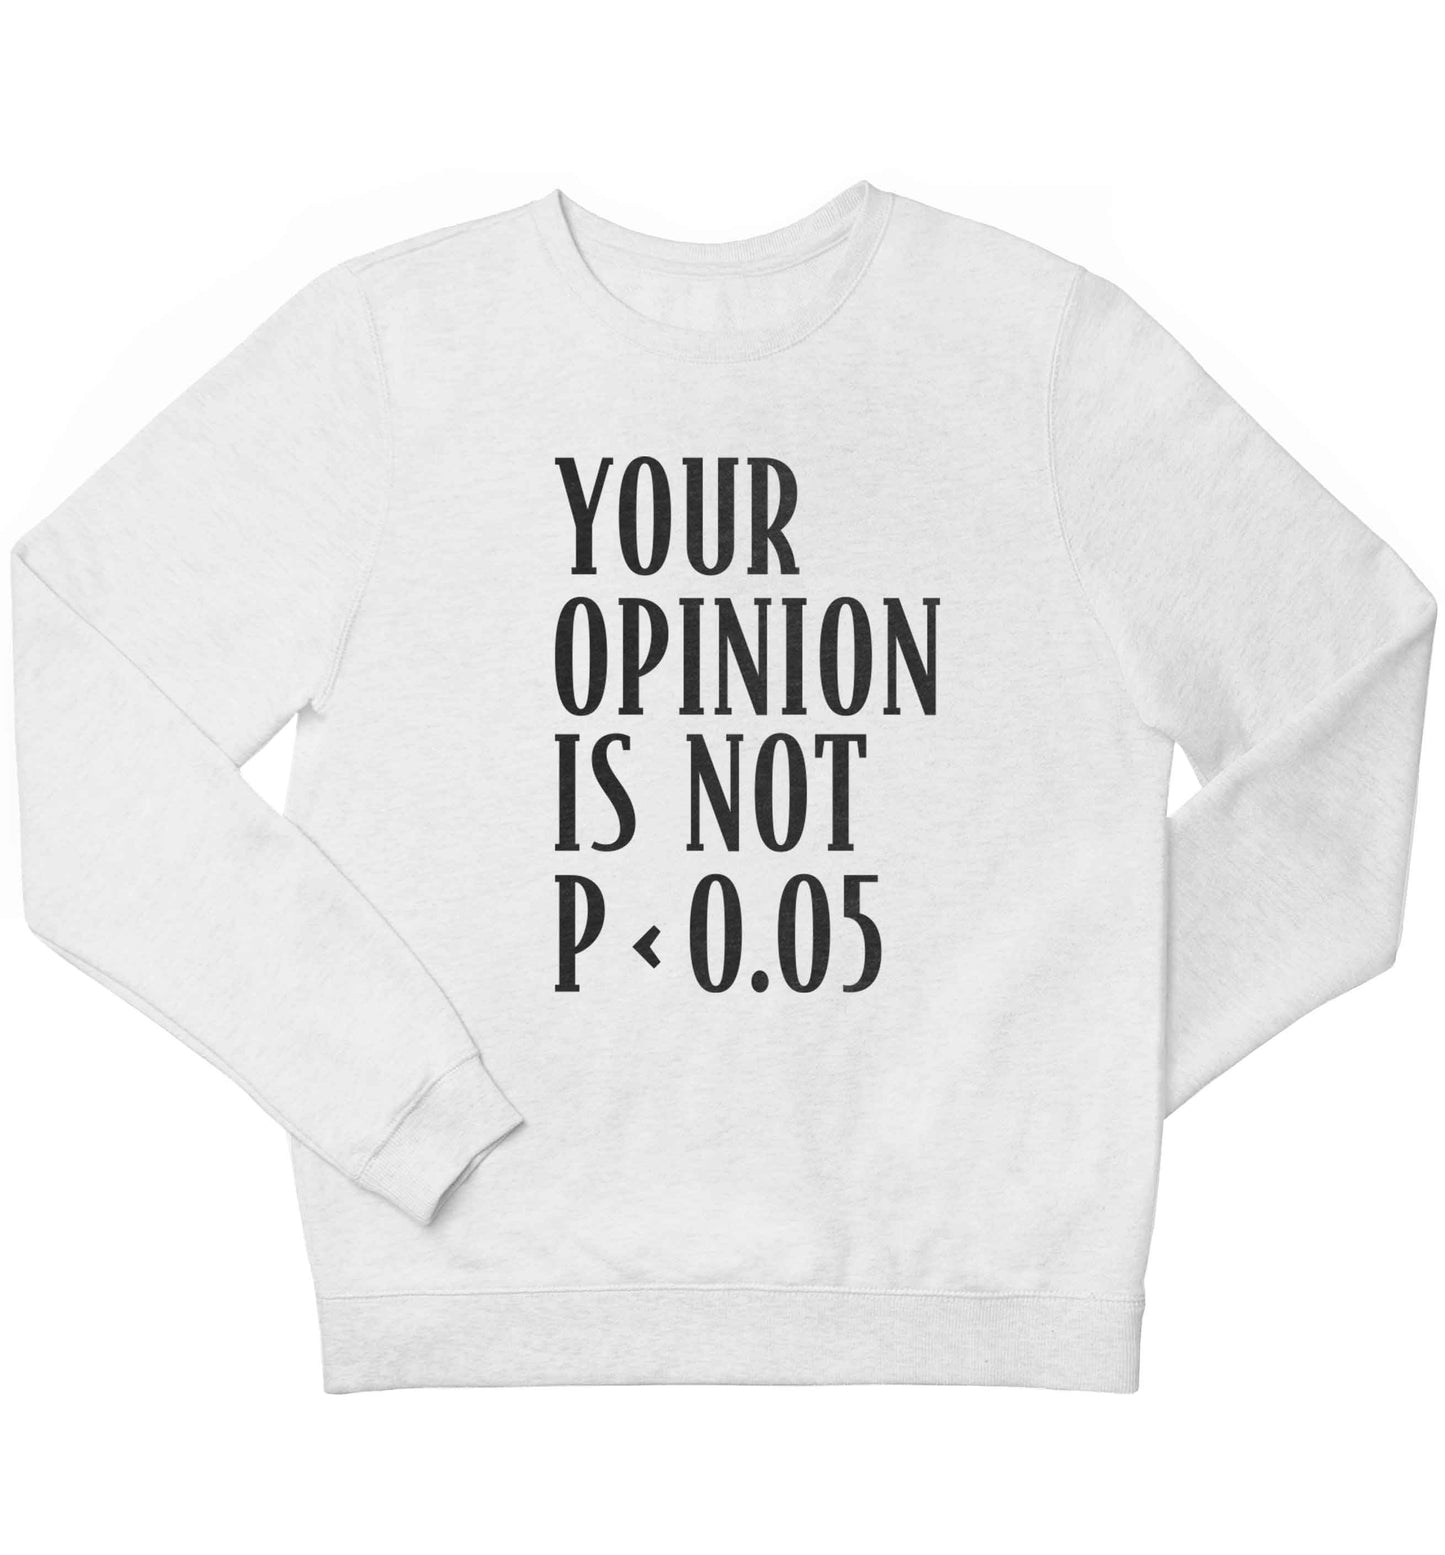 Your opinion is not P < 0.05children's white sweater 12-13 Years